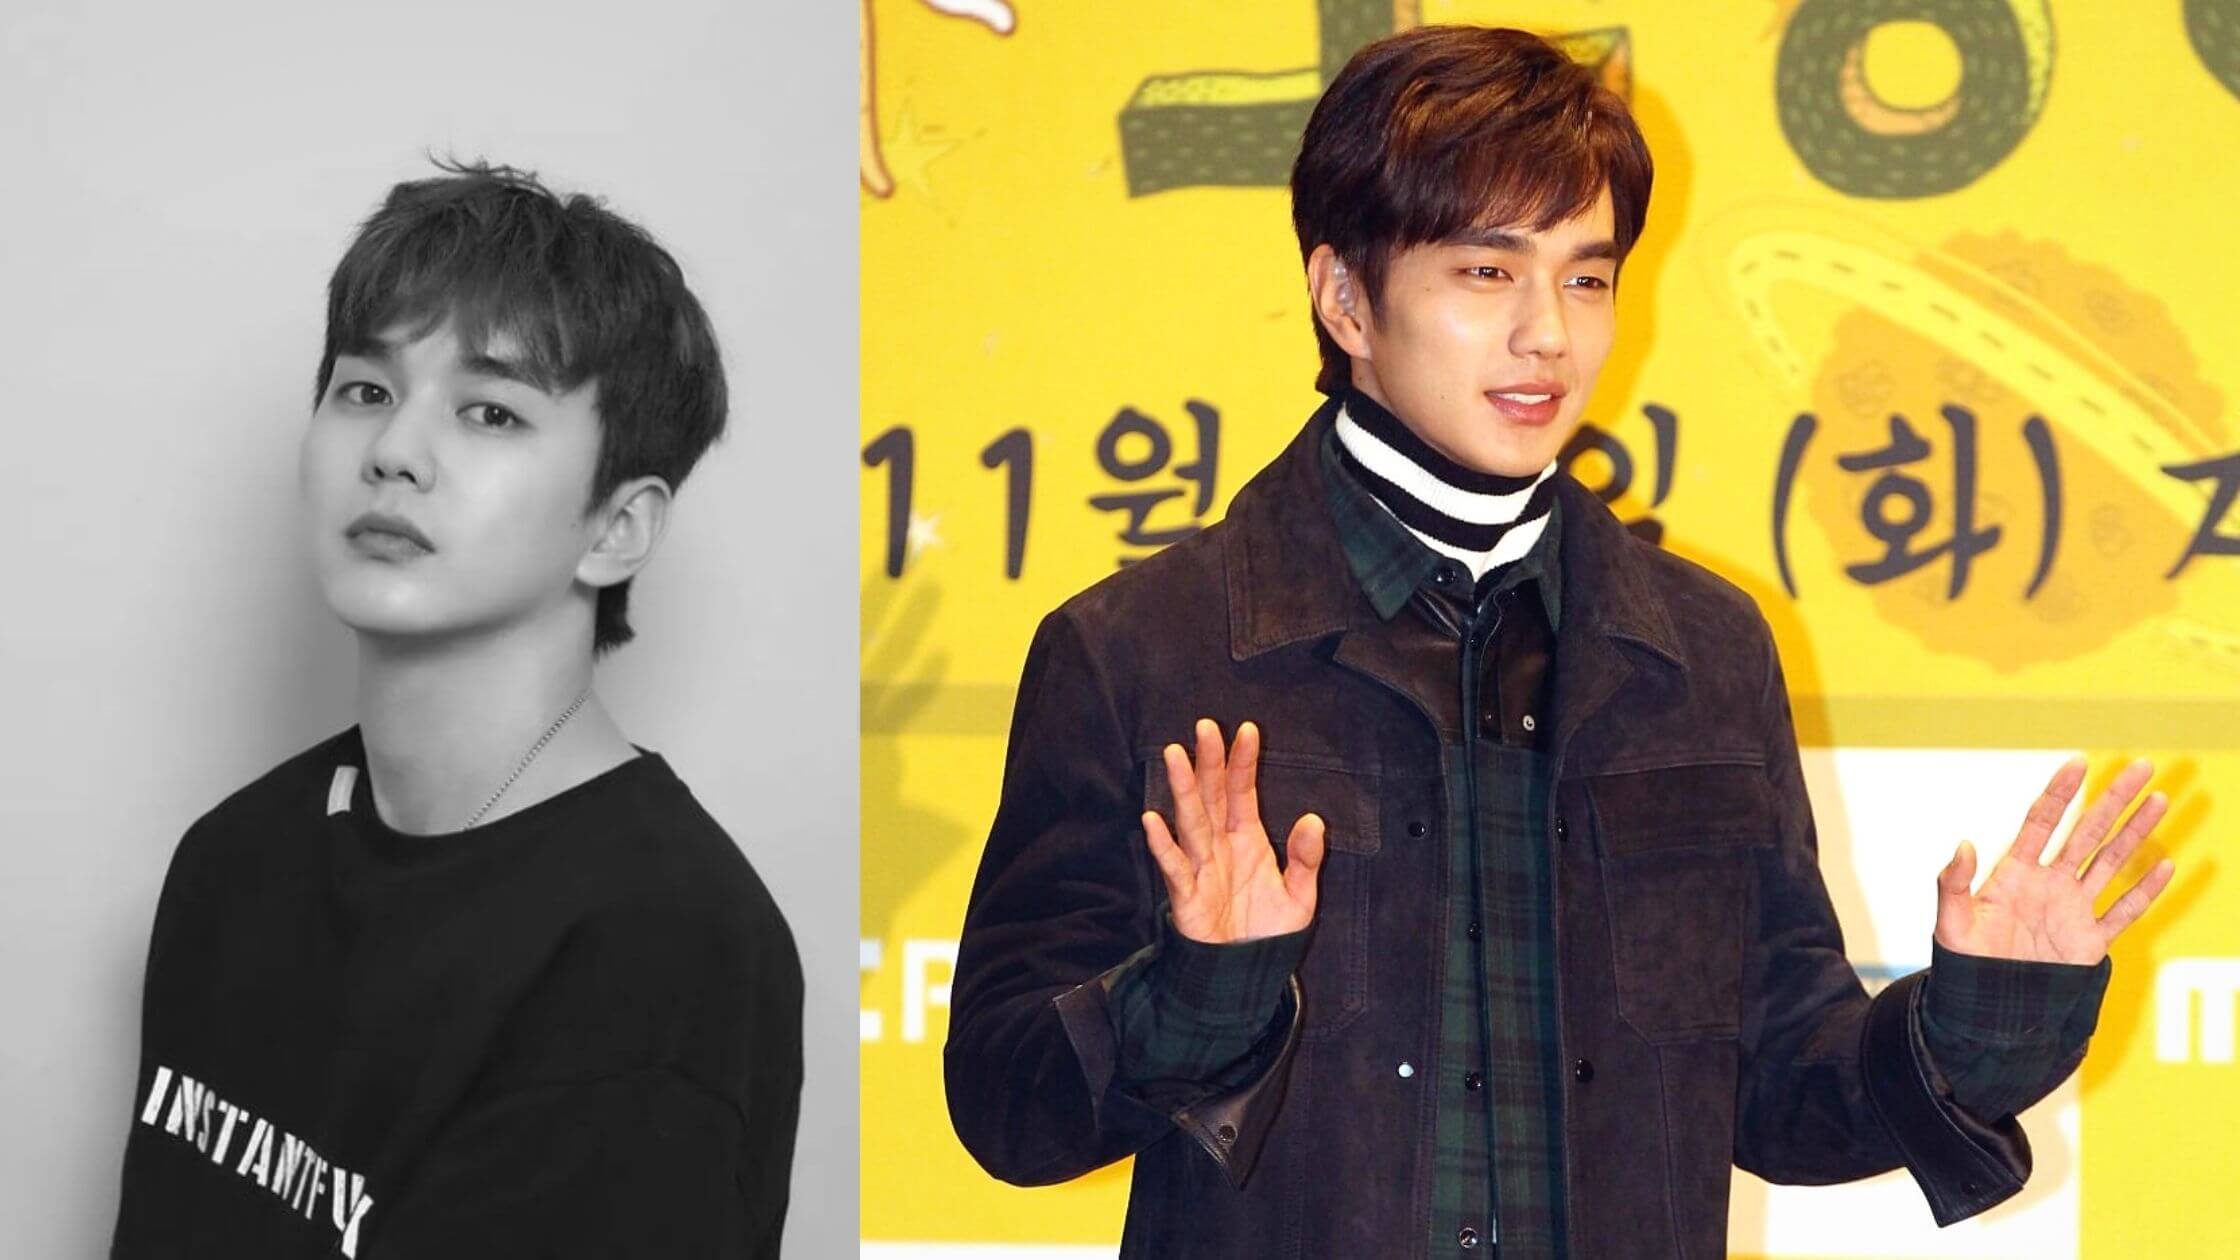 CONFIRMED-When-Flowers-Bloom-I-Think-Of-The-Moon-Actor-Yoo-Seung-Ho-Officially-Signs-With-YG-Entertainment-2